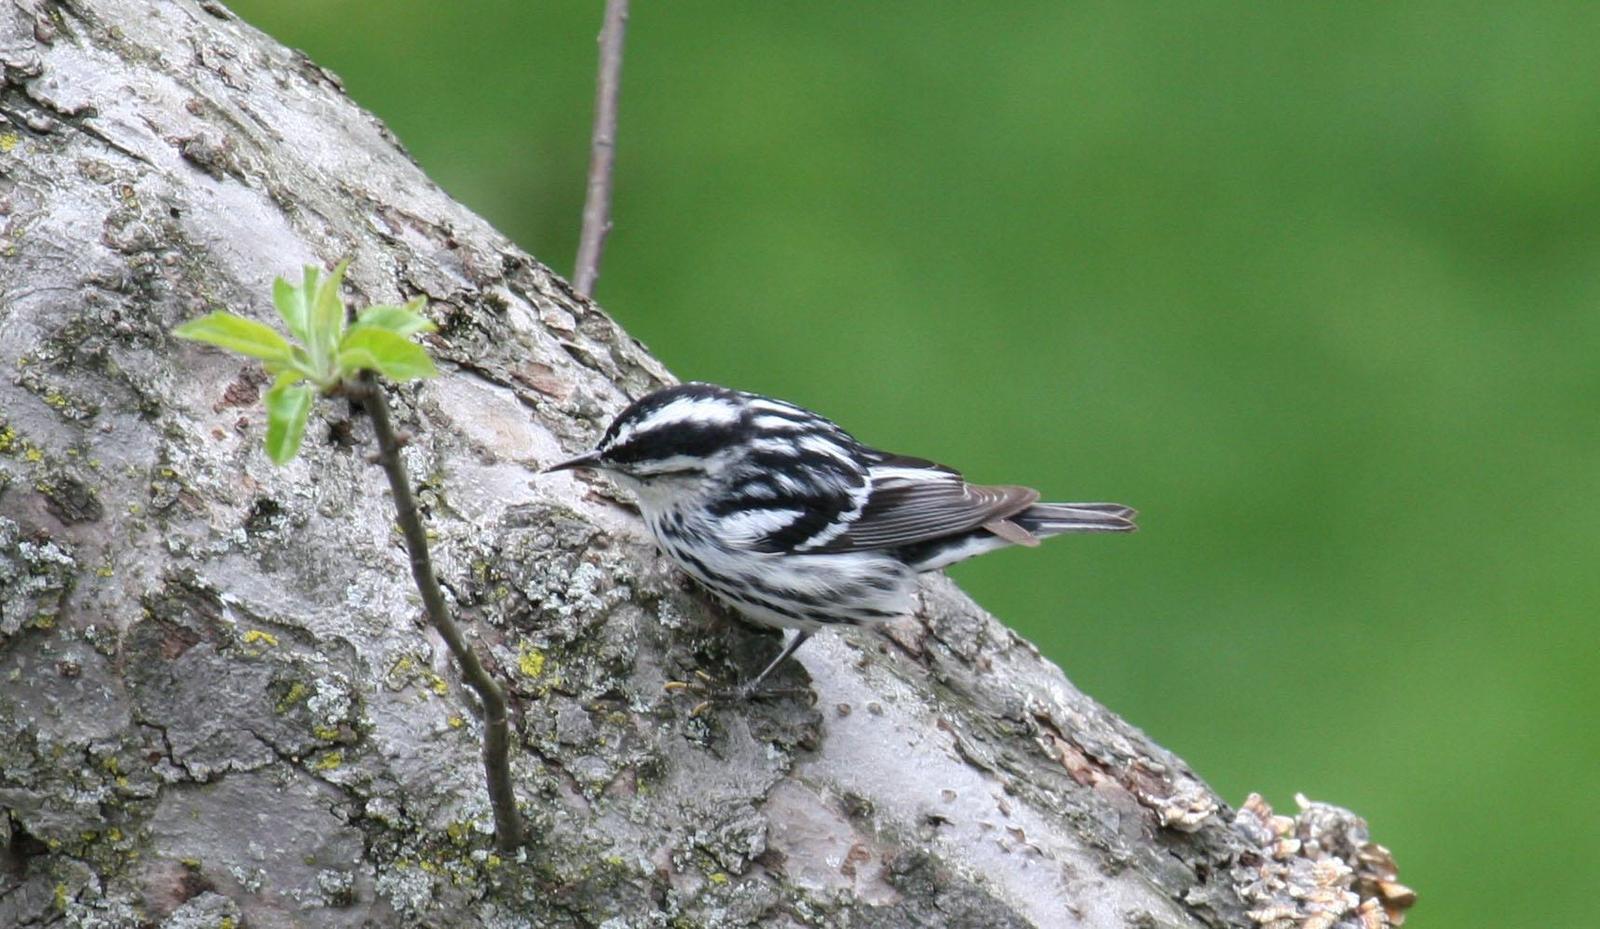 Black-and-white Warbler Photo by Roseanne CALECA